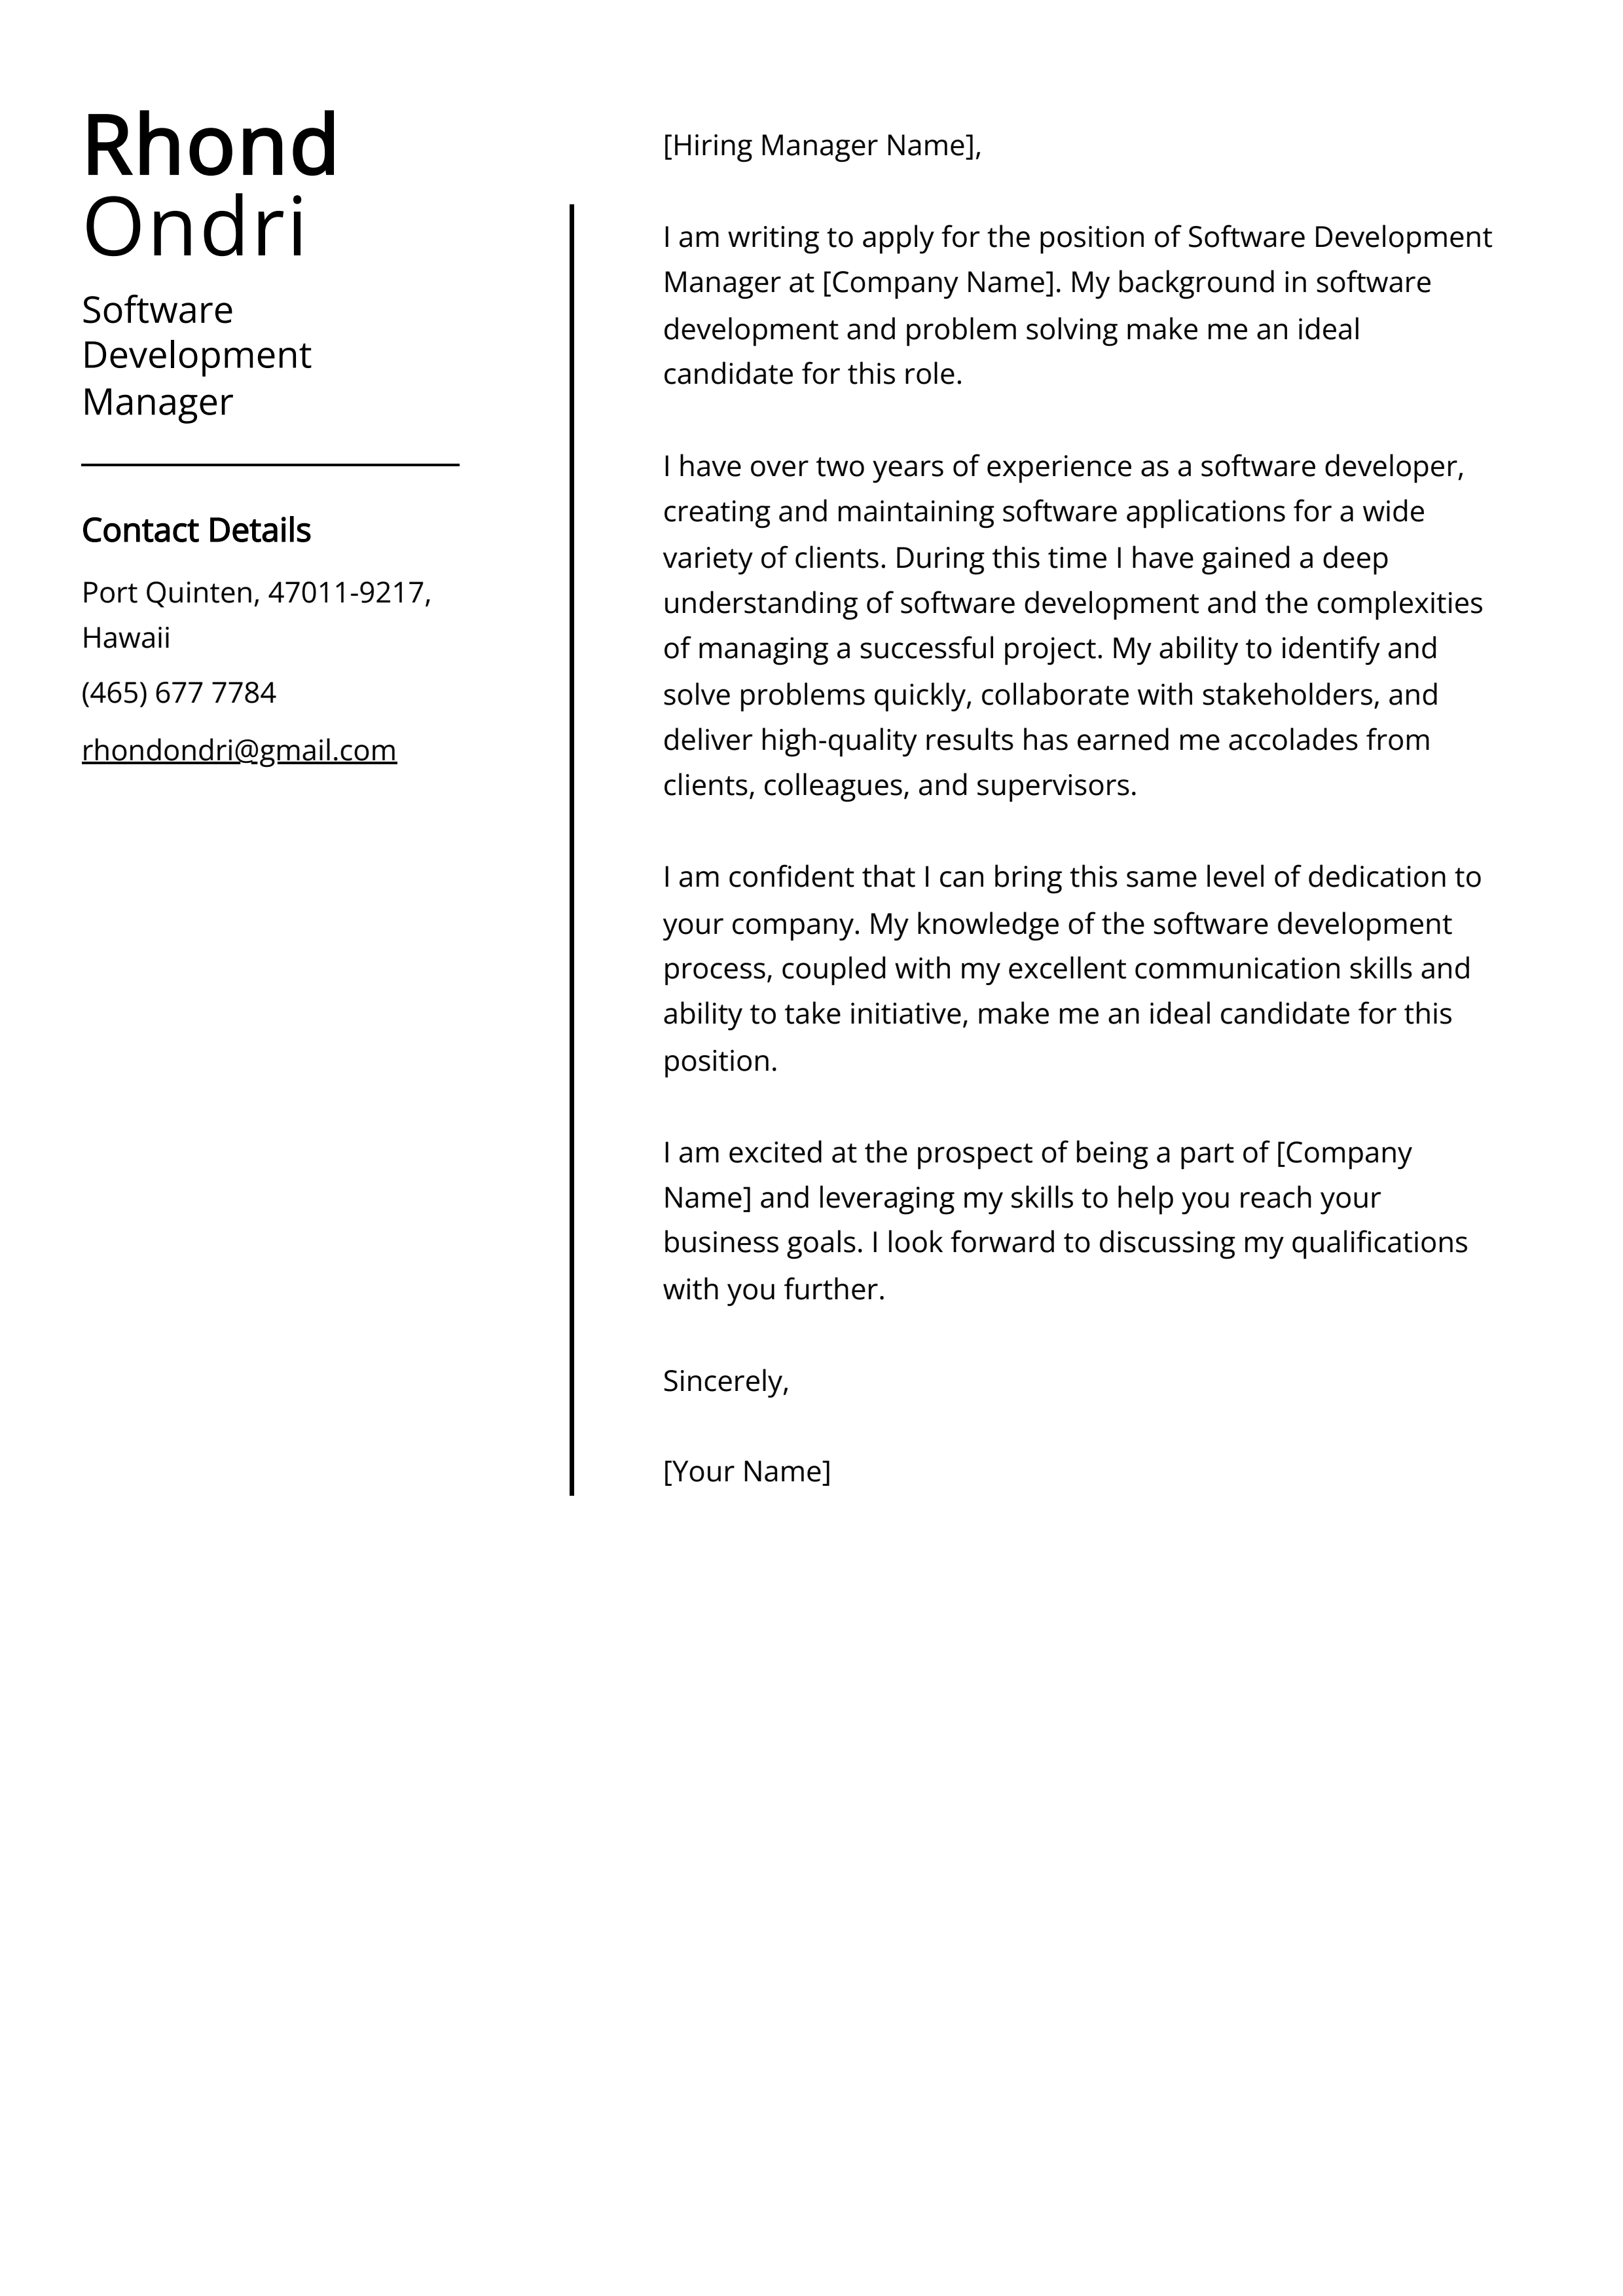 Software Development Manager Cover Letter Example